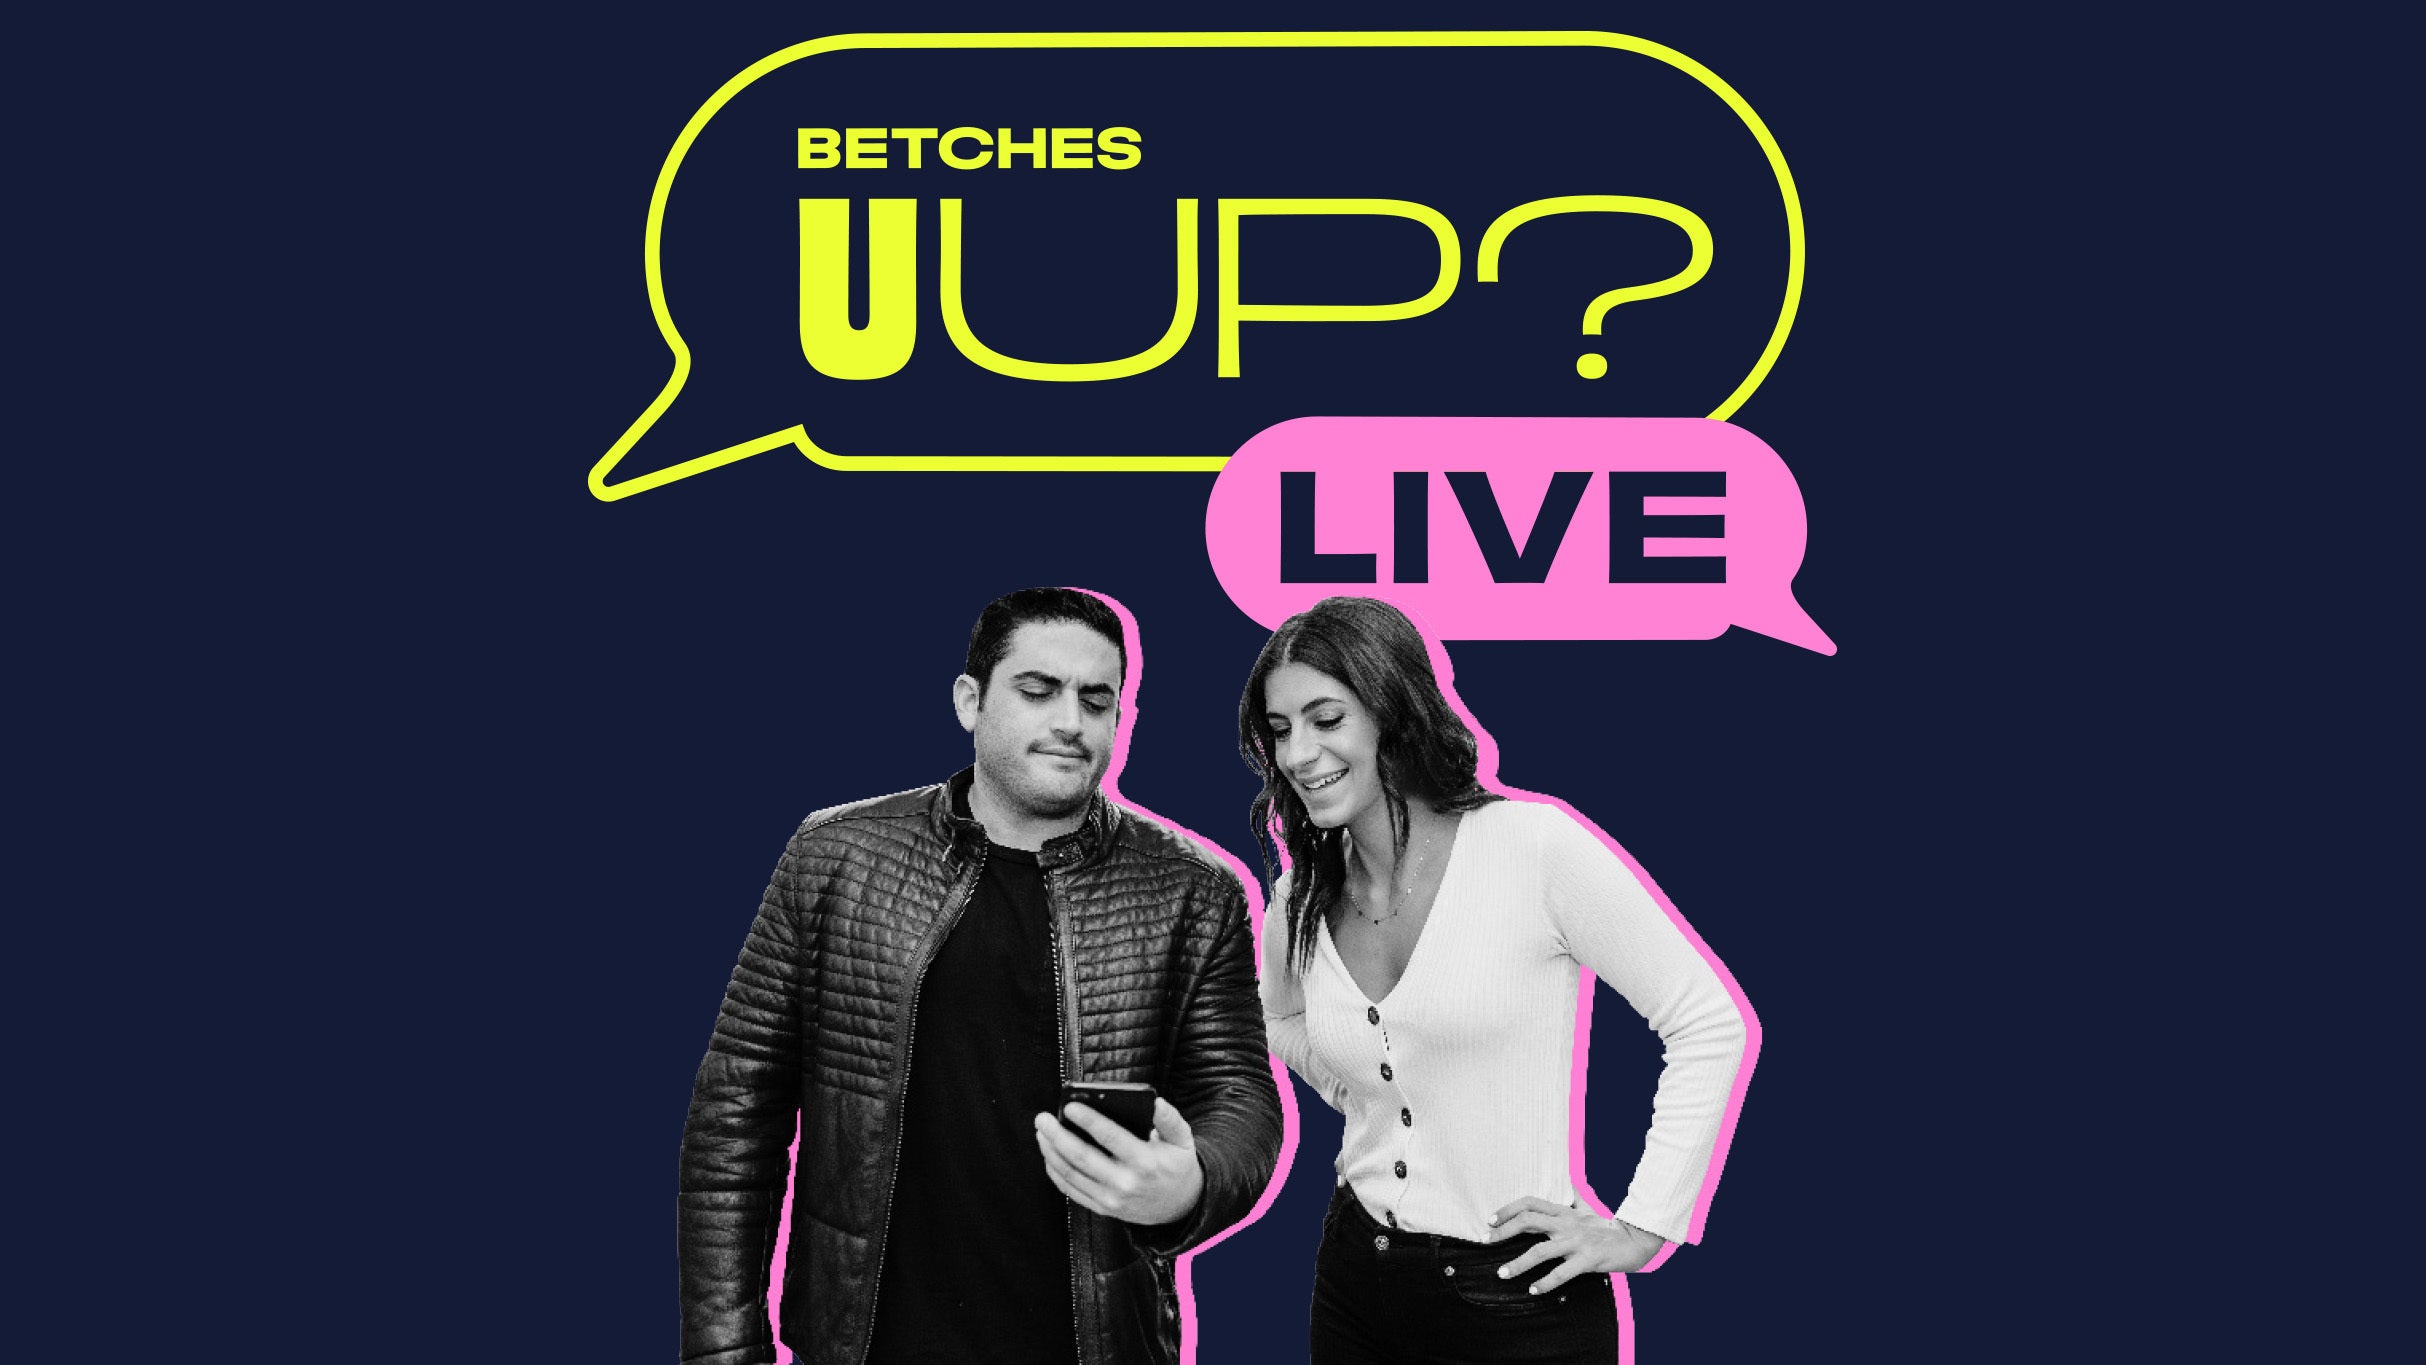 Betches U Up? Live Presented By Faux Pas pre-sale code for early tickets in Los Angeles